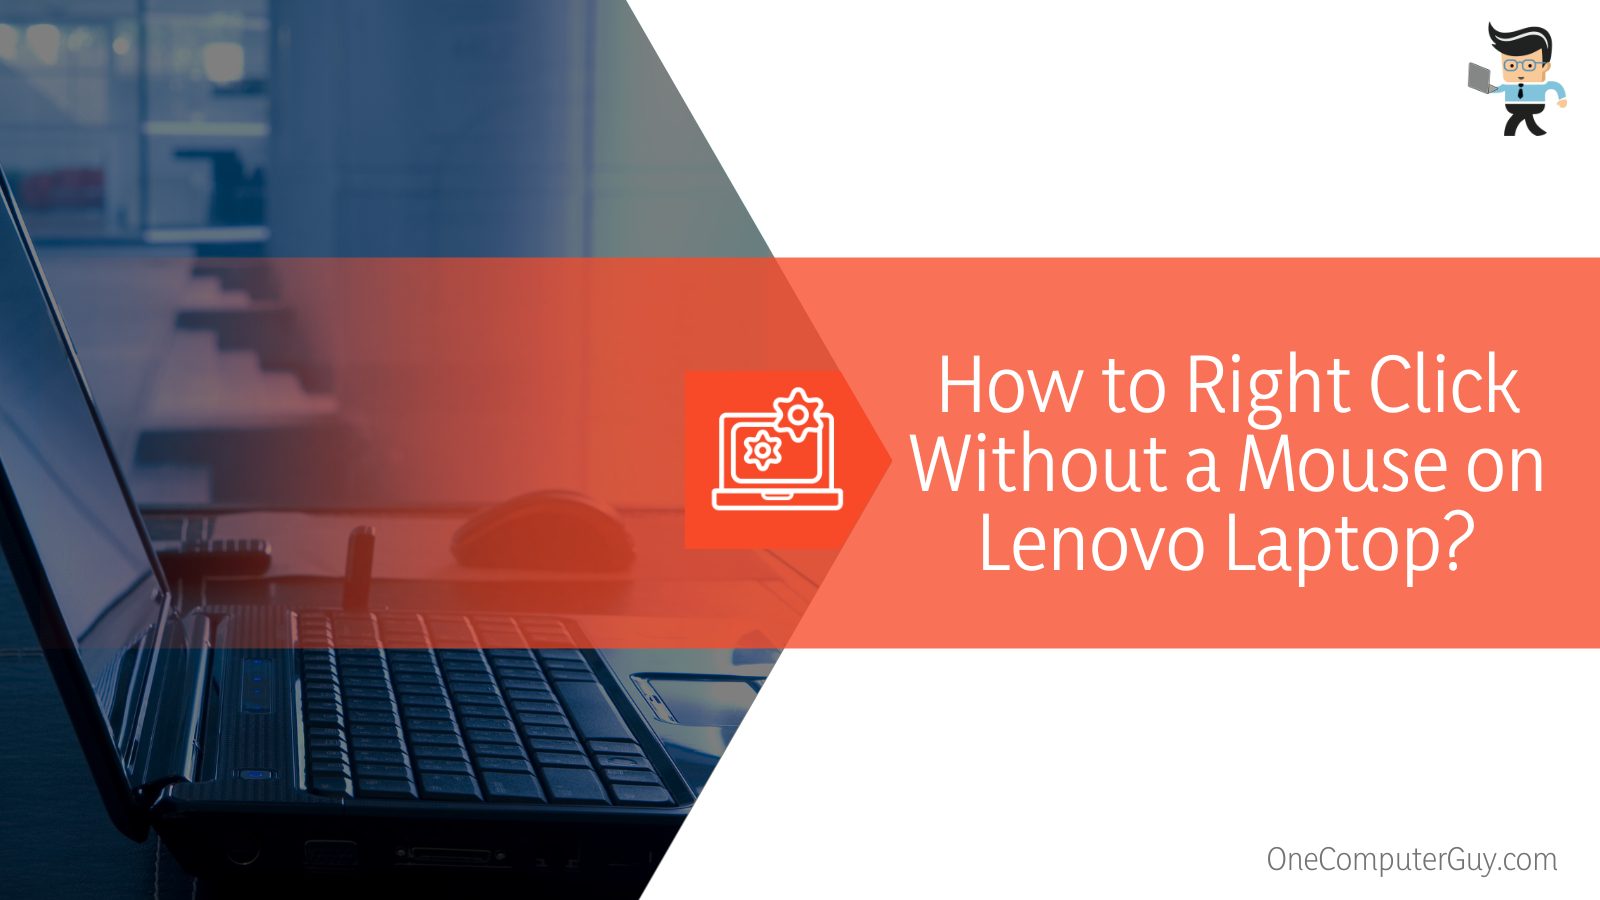 How to Right Click Without a Mouse on Lenovo Laptop